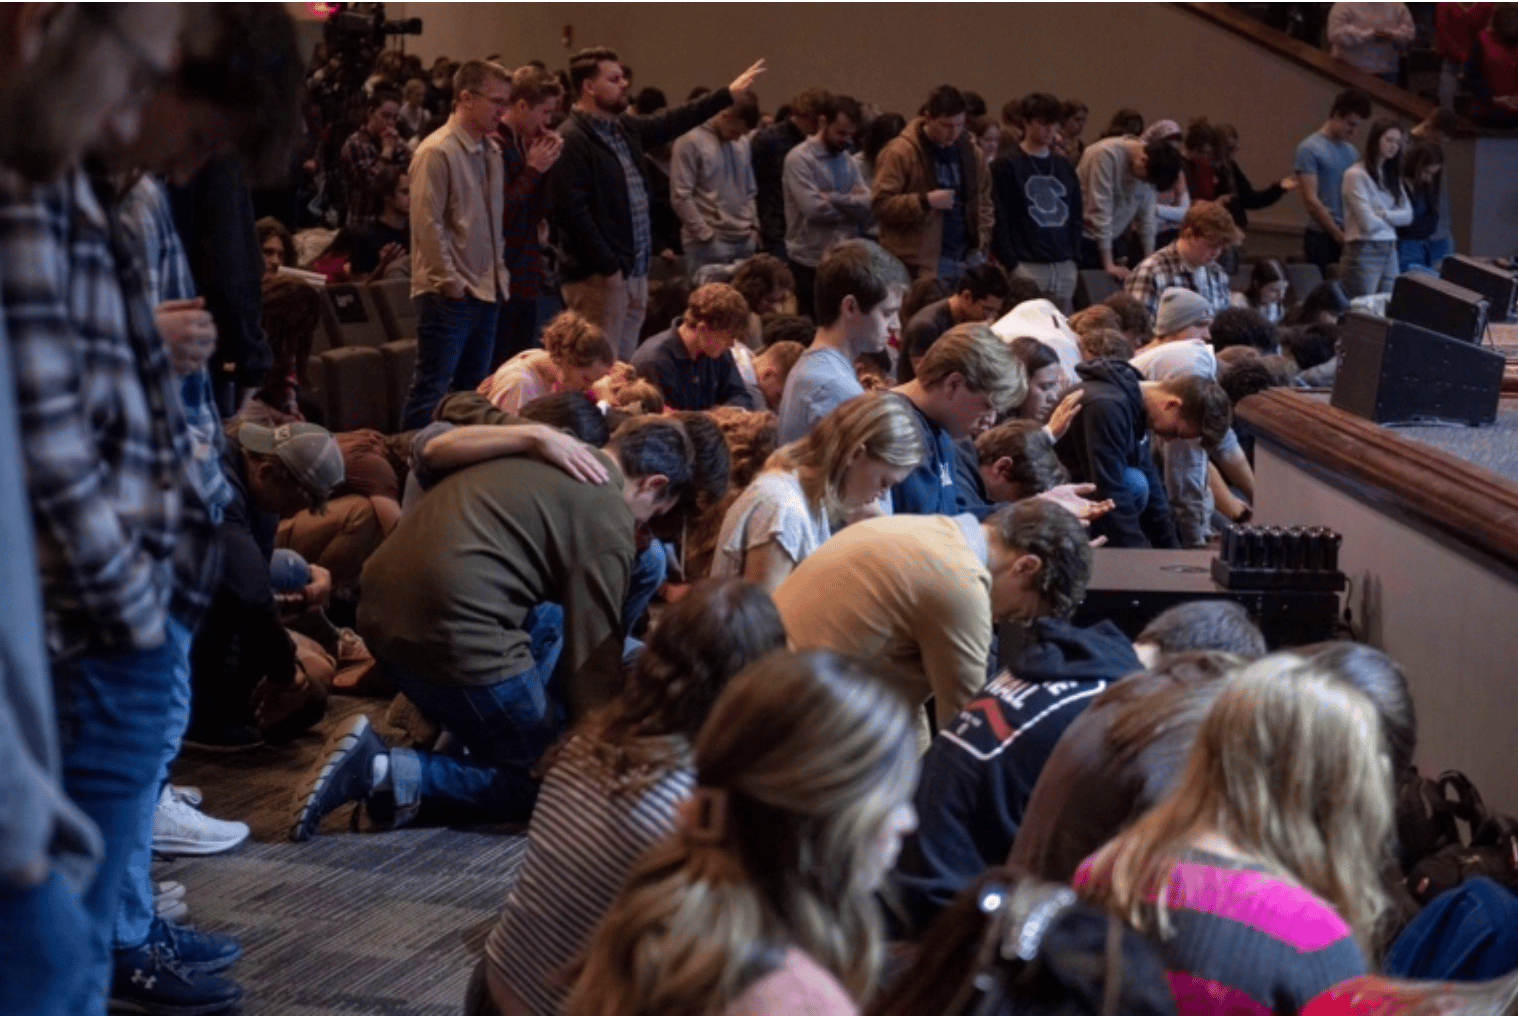 The Fire is spreading! Christian university in Ohio now experiencing an outpouring on campus